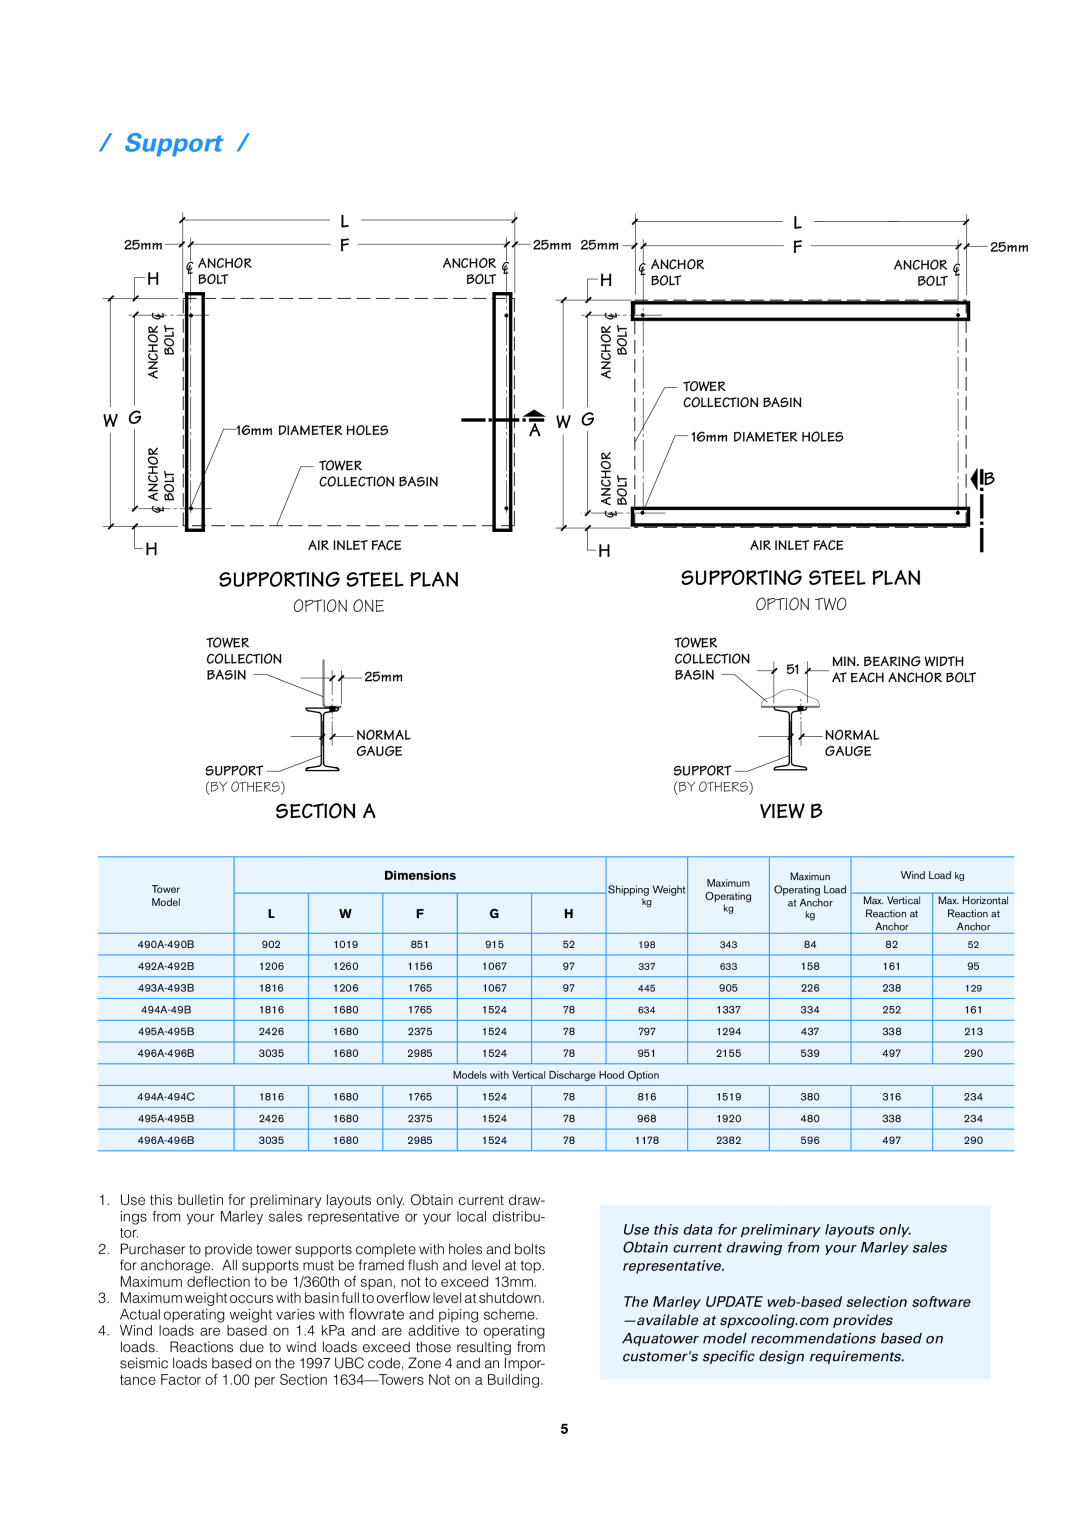 SPX Cooling Technologies Marley Aquatower manual Section A, Supporting Steel Plan 